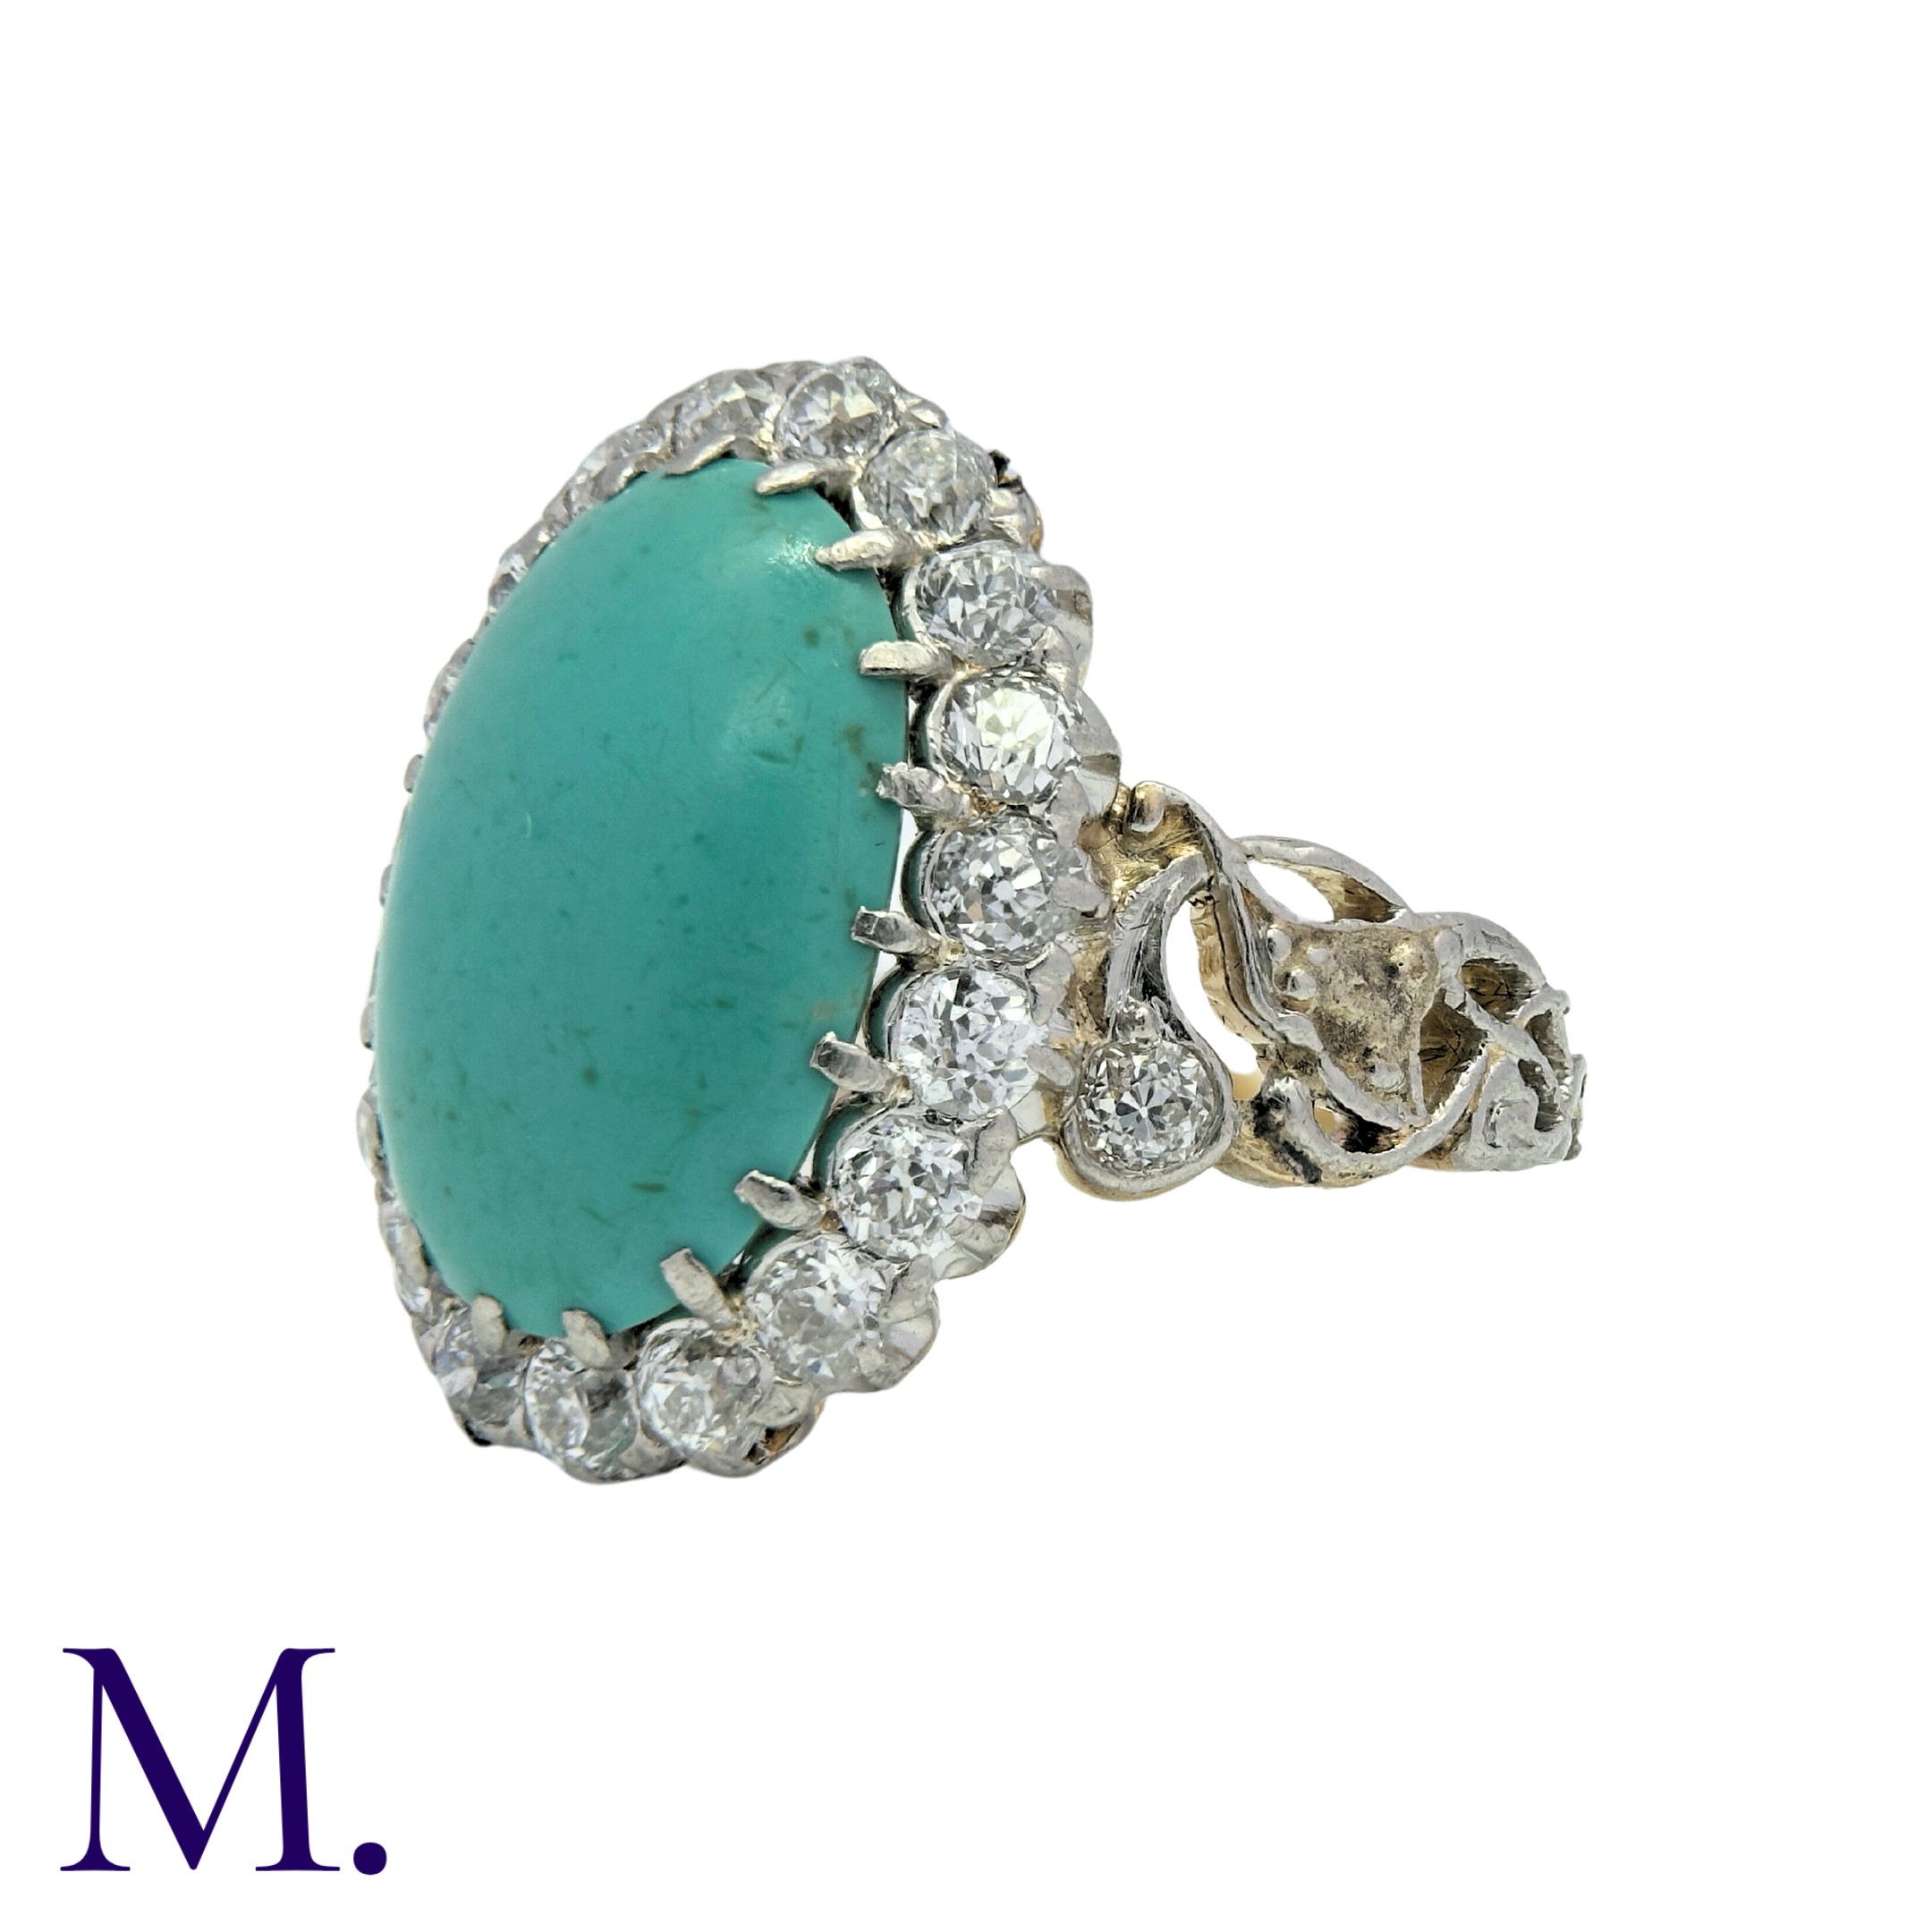 An Antique Turquoise and Diamond Cluster Ring in 18K yellow gold, set with an oval cabochon of - Image 2 of 3